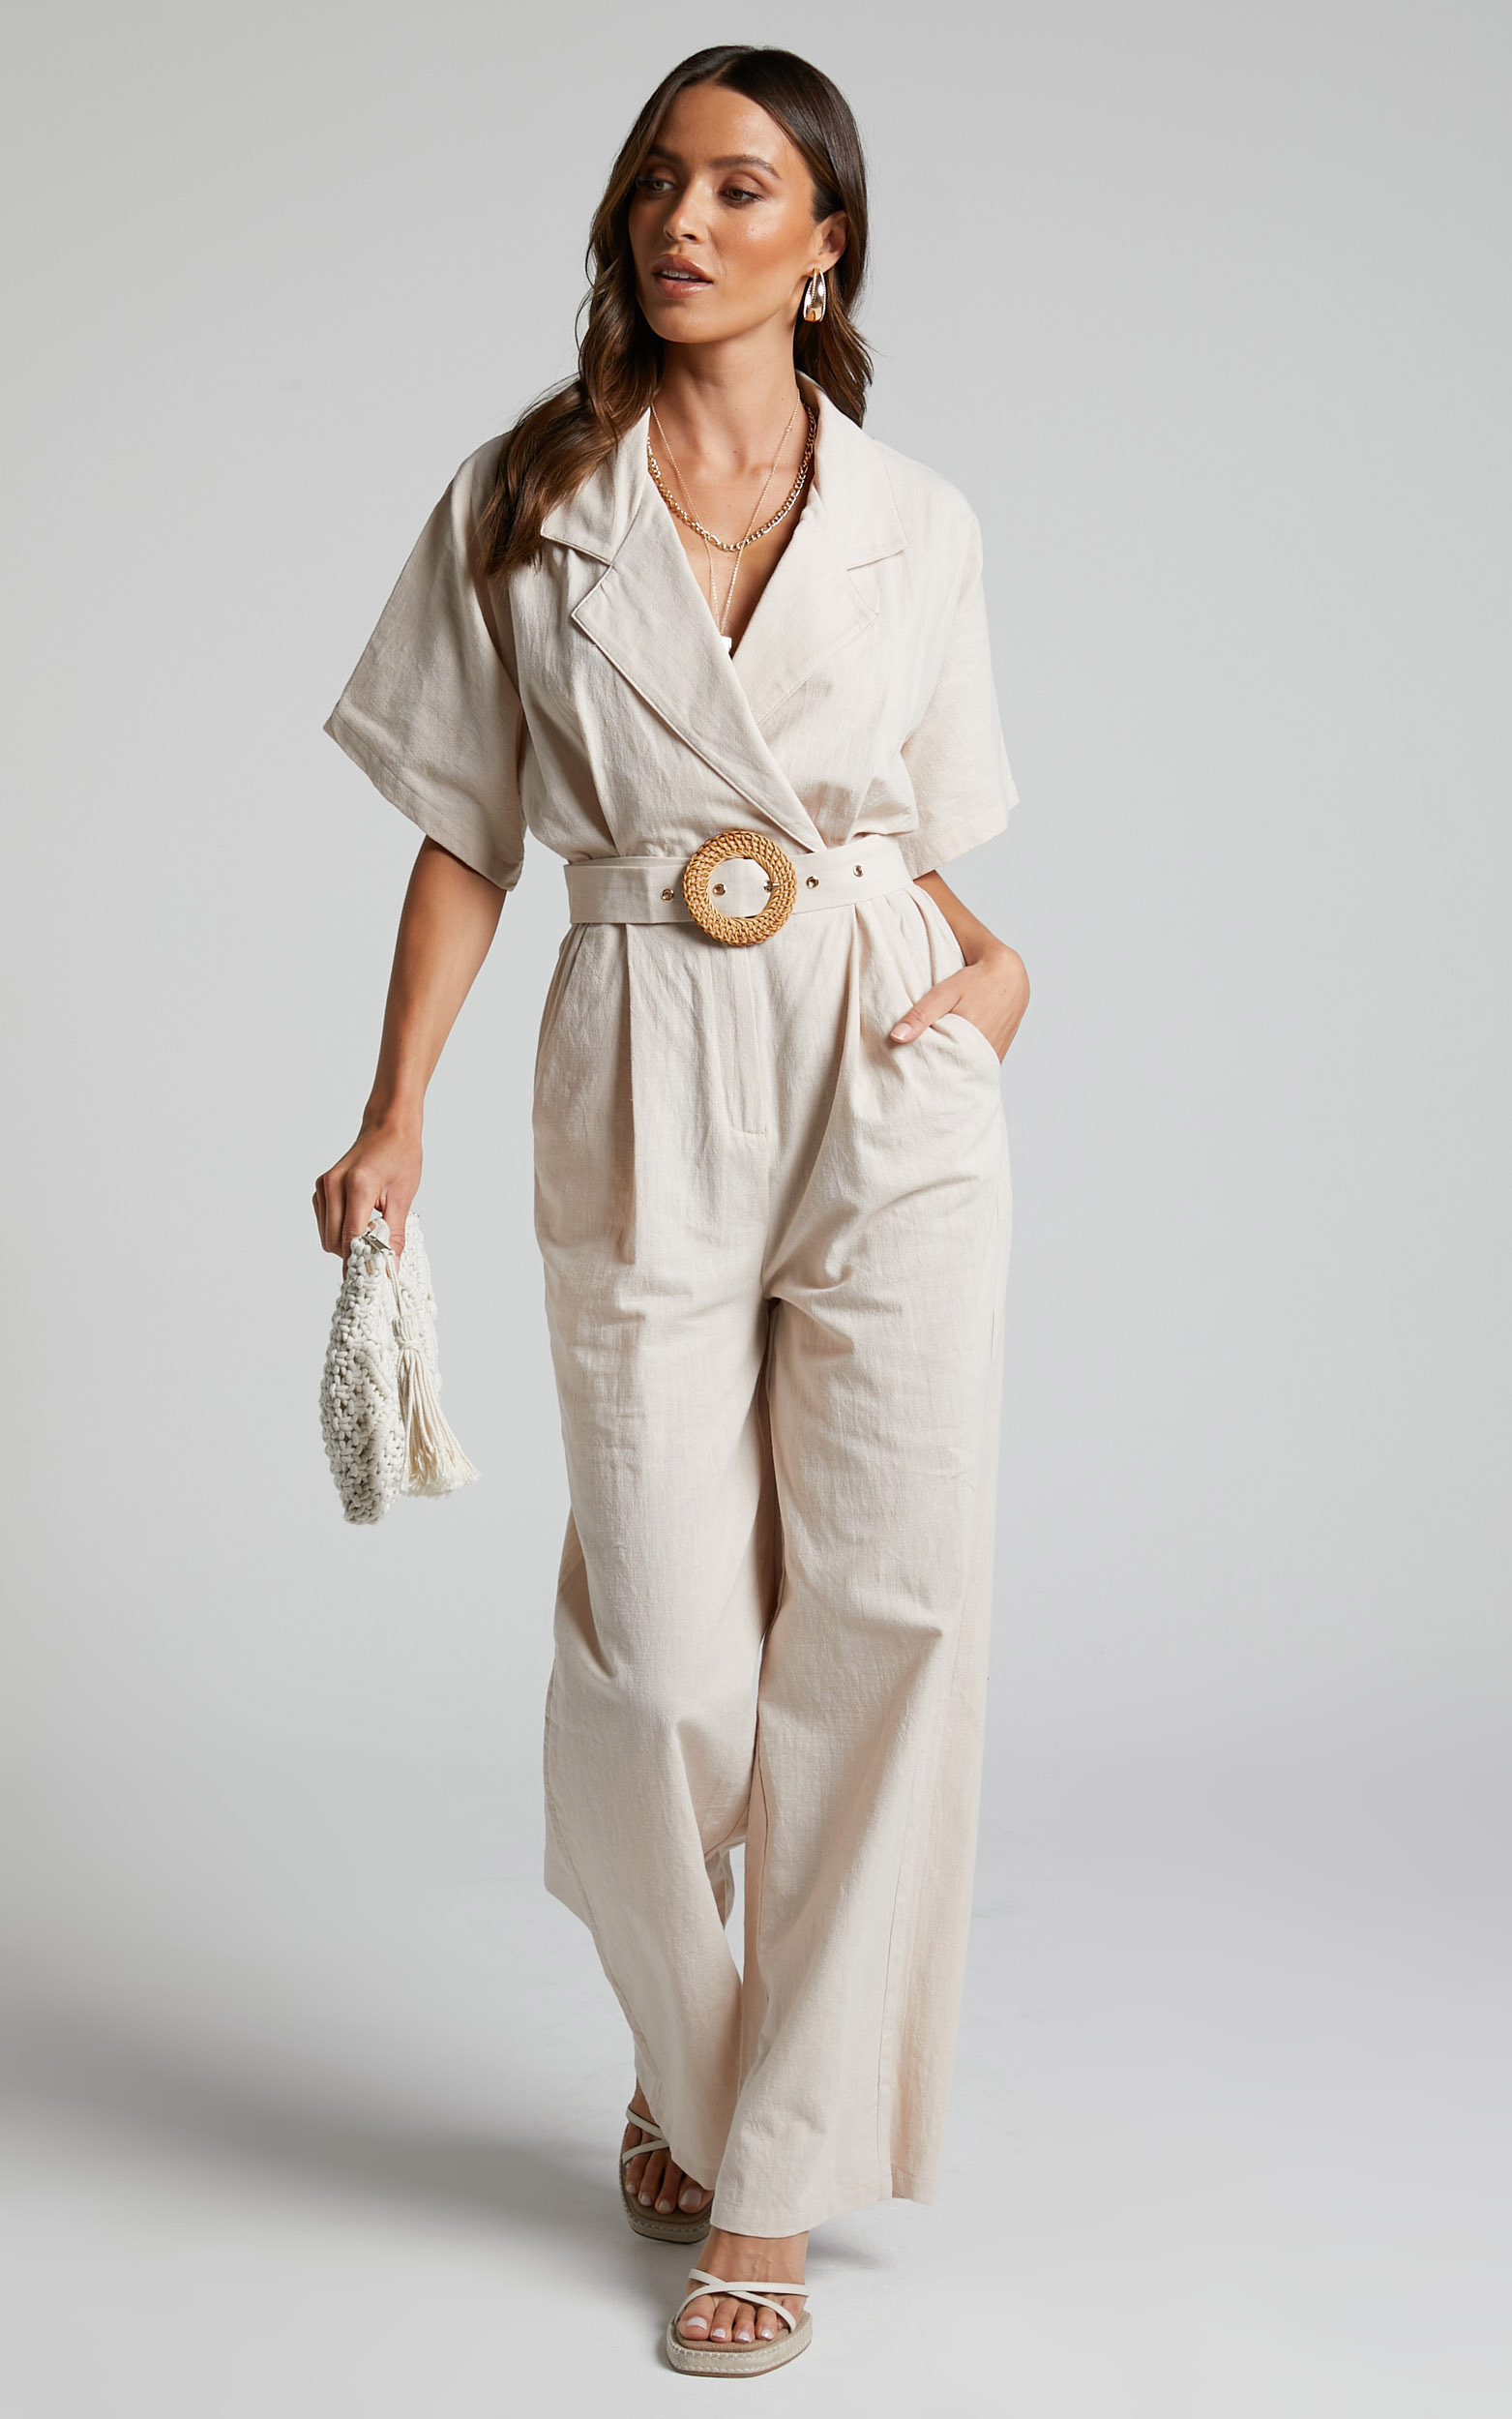 Paco Jumpsuit - Short Sleeve Collared Belted Wide Leg Jumpsuit in Biscuit - 06, BRN1, hi-res image number null